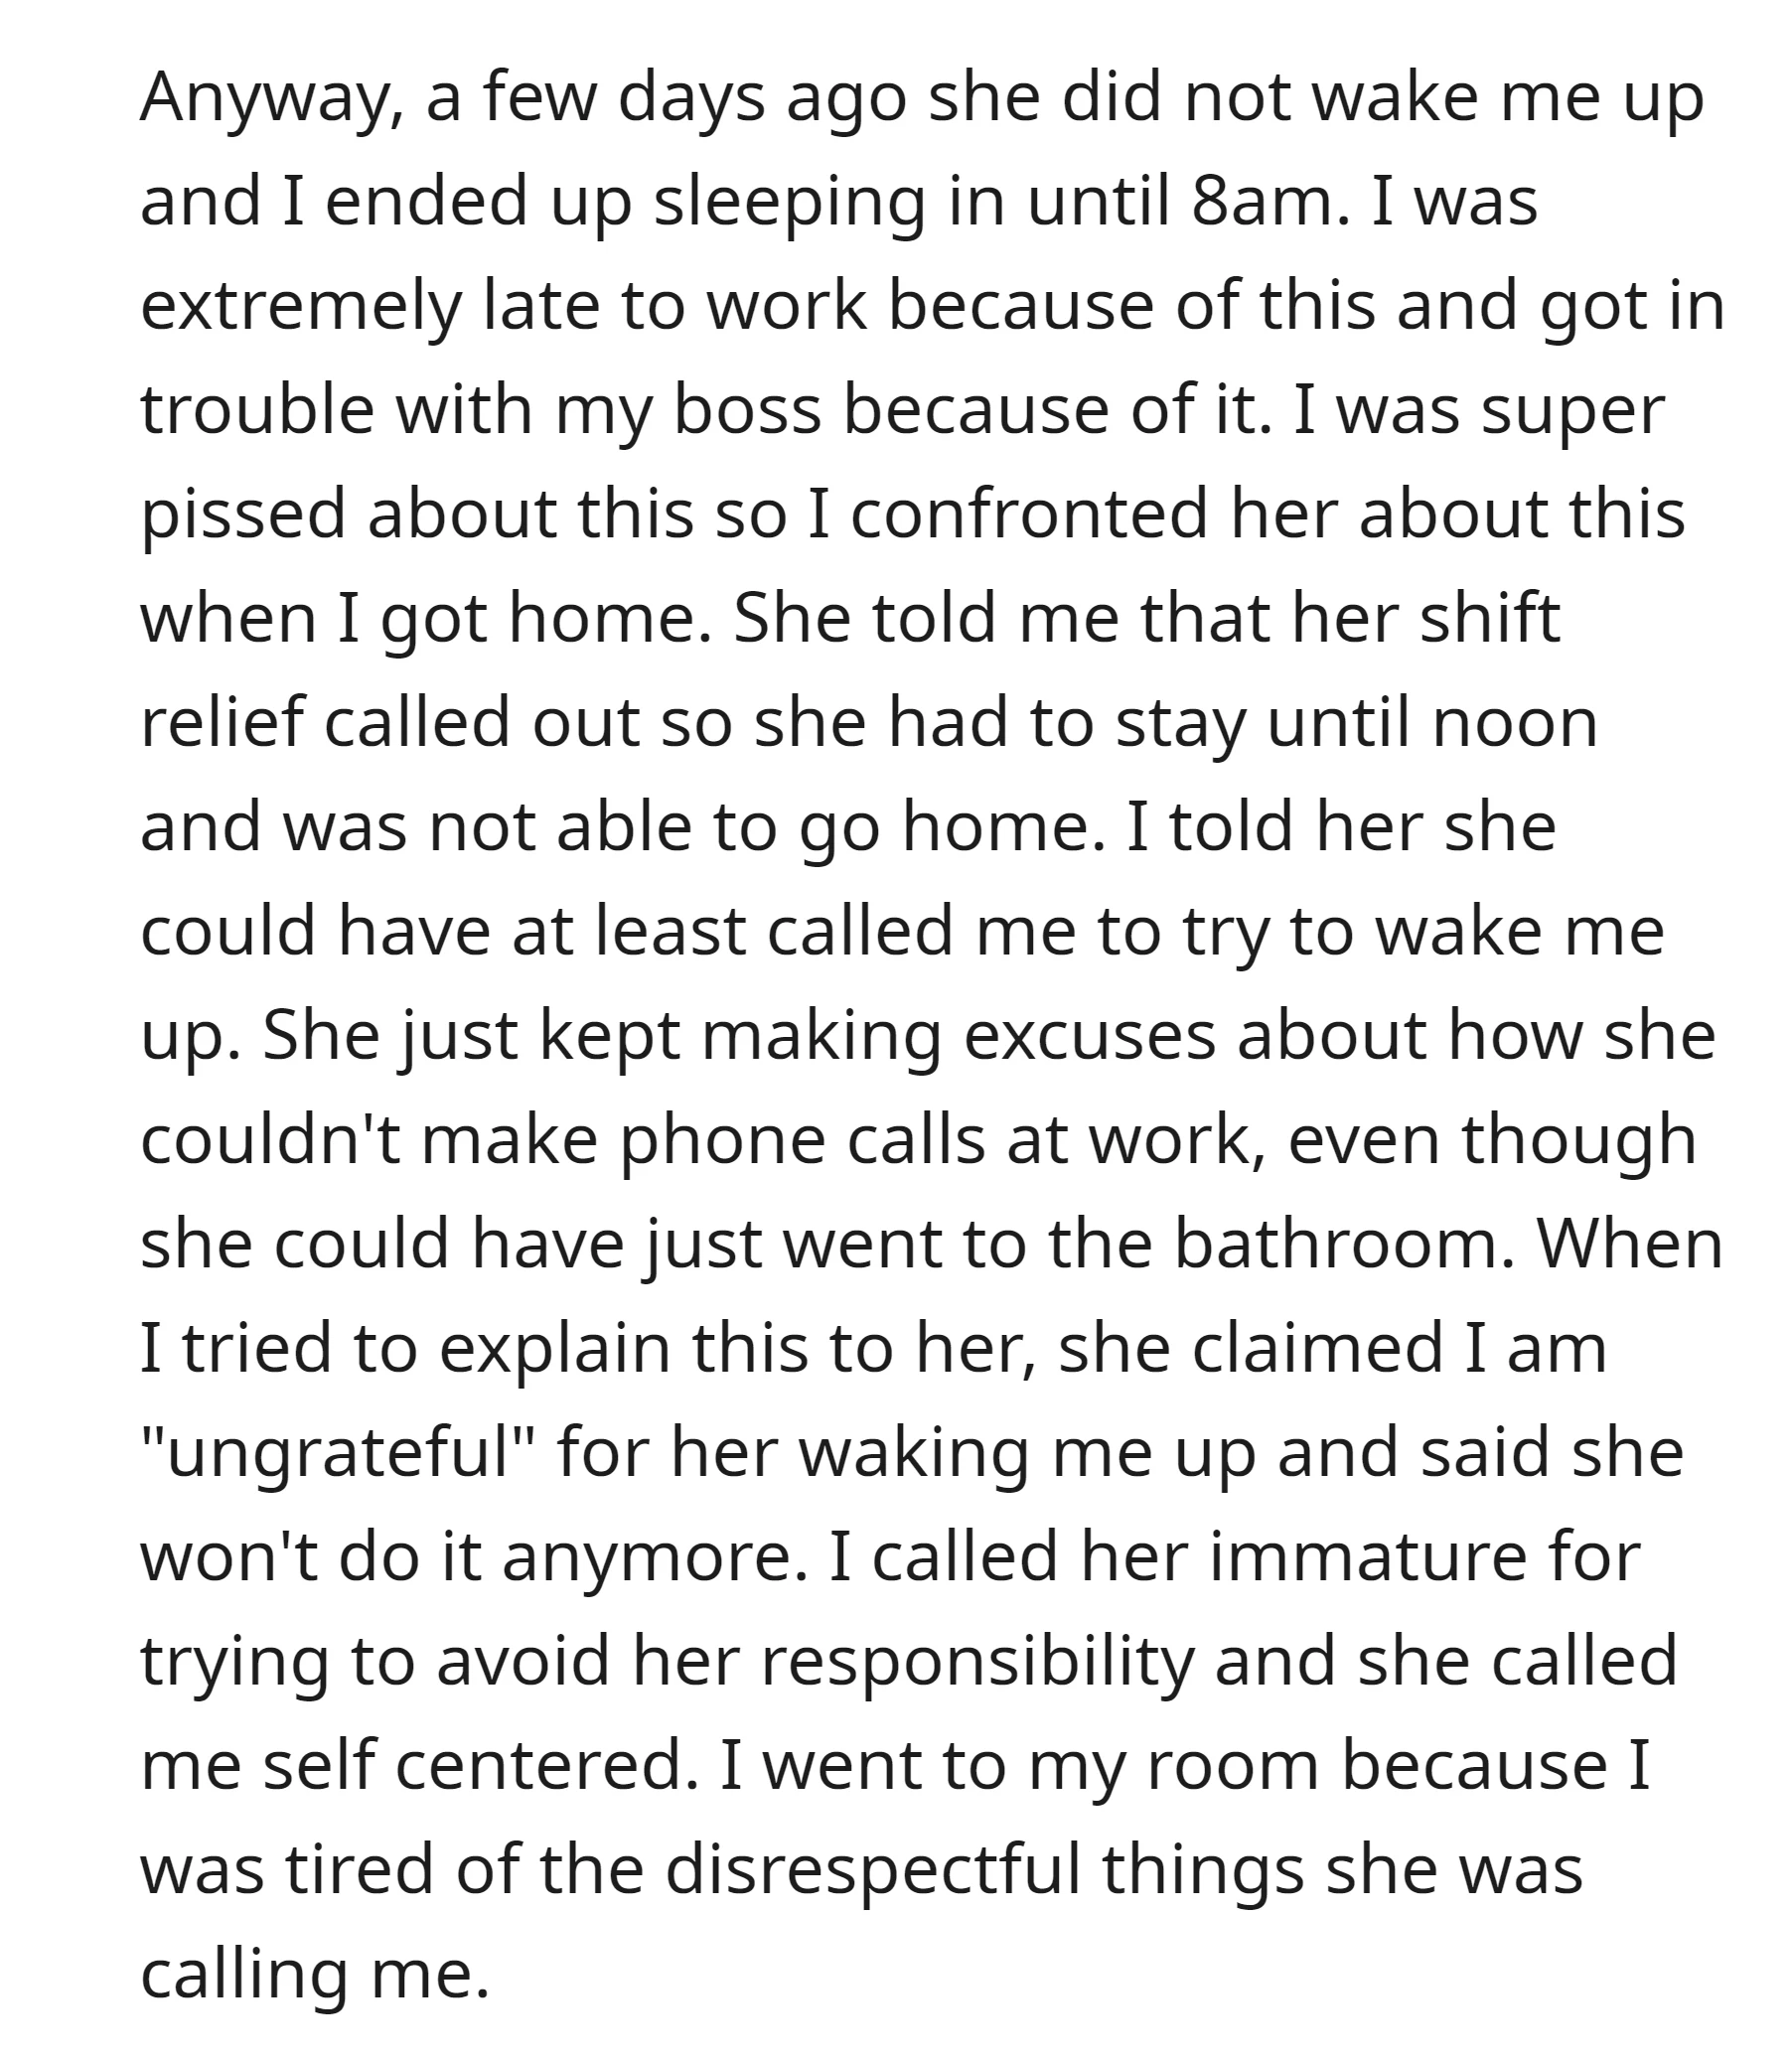 The OP got upset with her roommate Gwen for not waking her up on a workday, leading to her being late for work